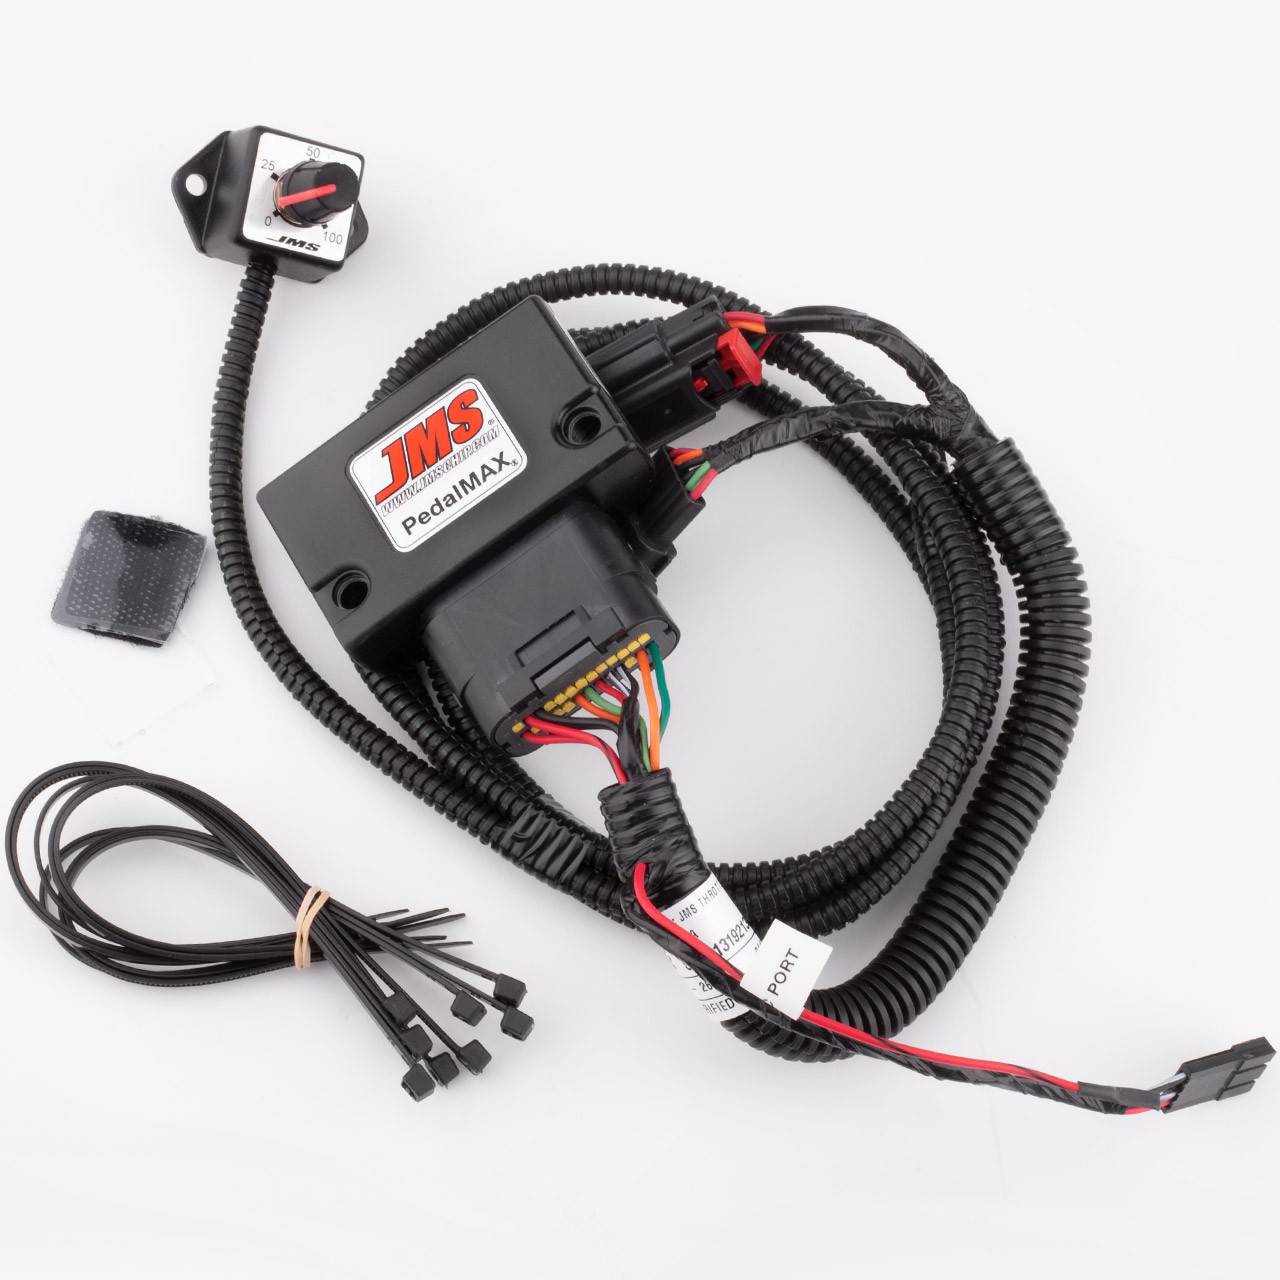 Viper PEDALMAX DRIVE BY WIRE THROTTLE ENHANCEMENT DEVICE - PLUG AND PLAY - PX1114DCX6